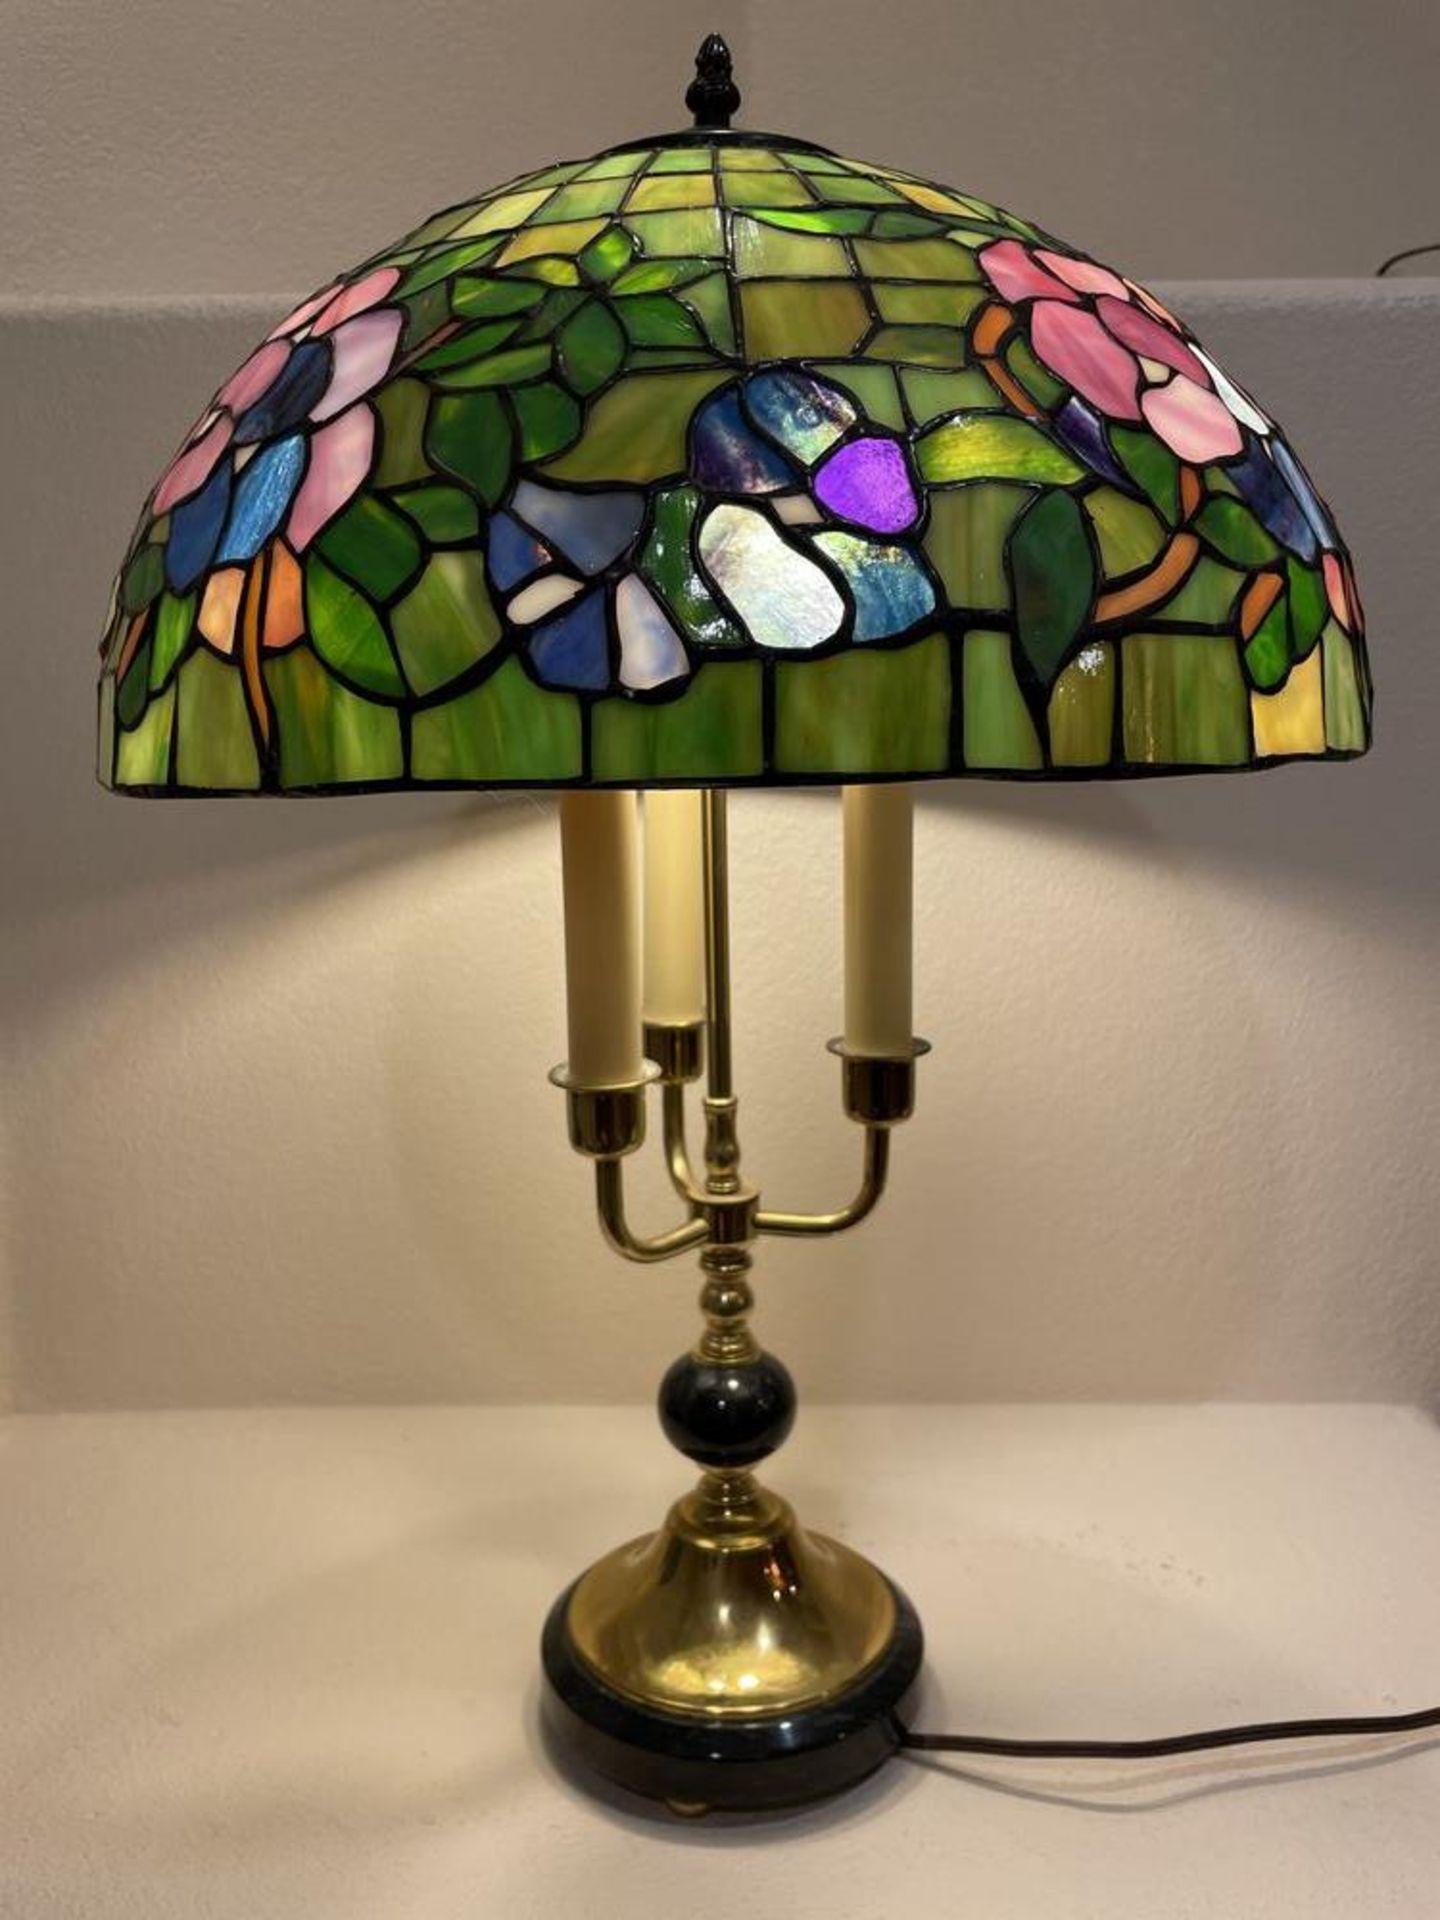 Tall Antique Gold and Marble lamp with Tiffany Style Lamp Shade - 24 x 18" - Image 7 of 7